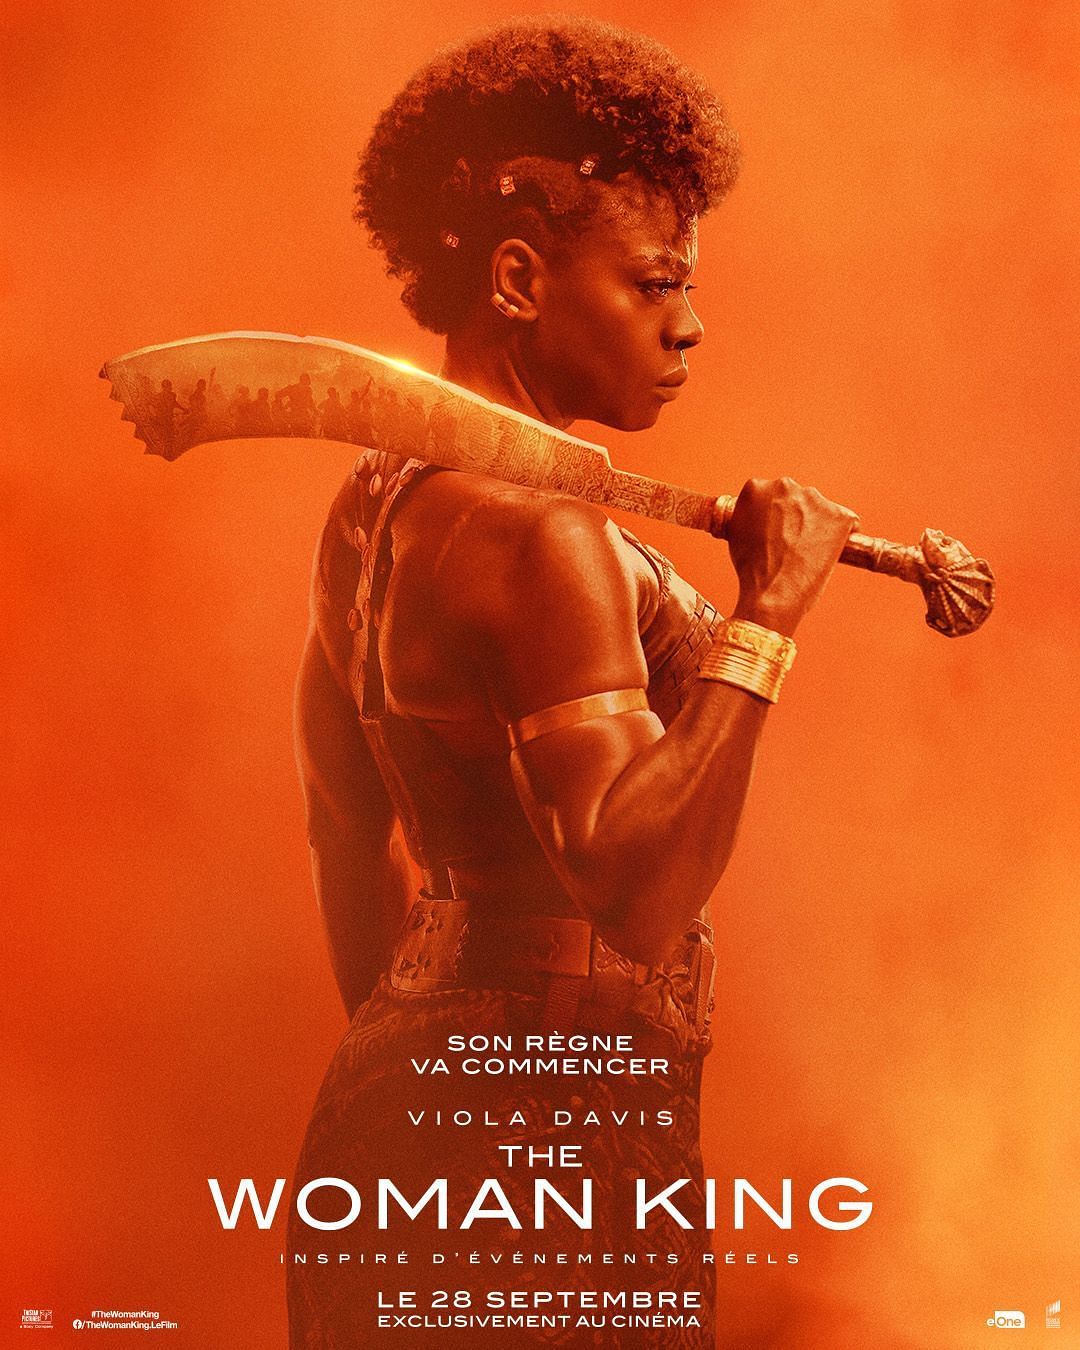 The Woman King (Image via Sony Pictures)